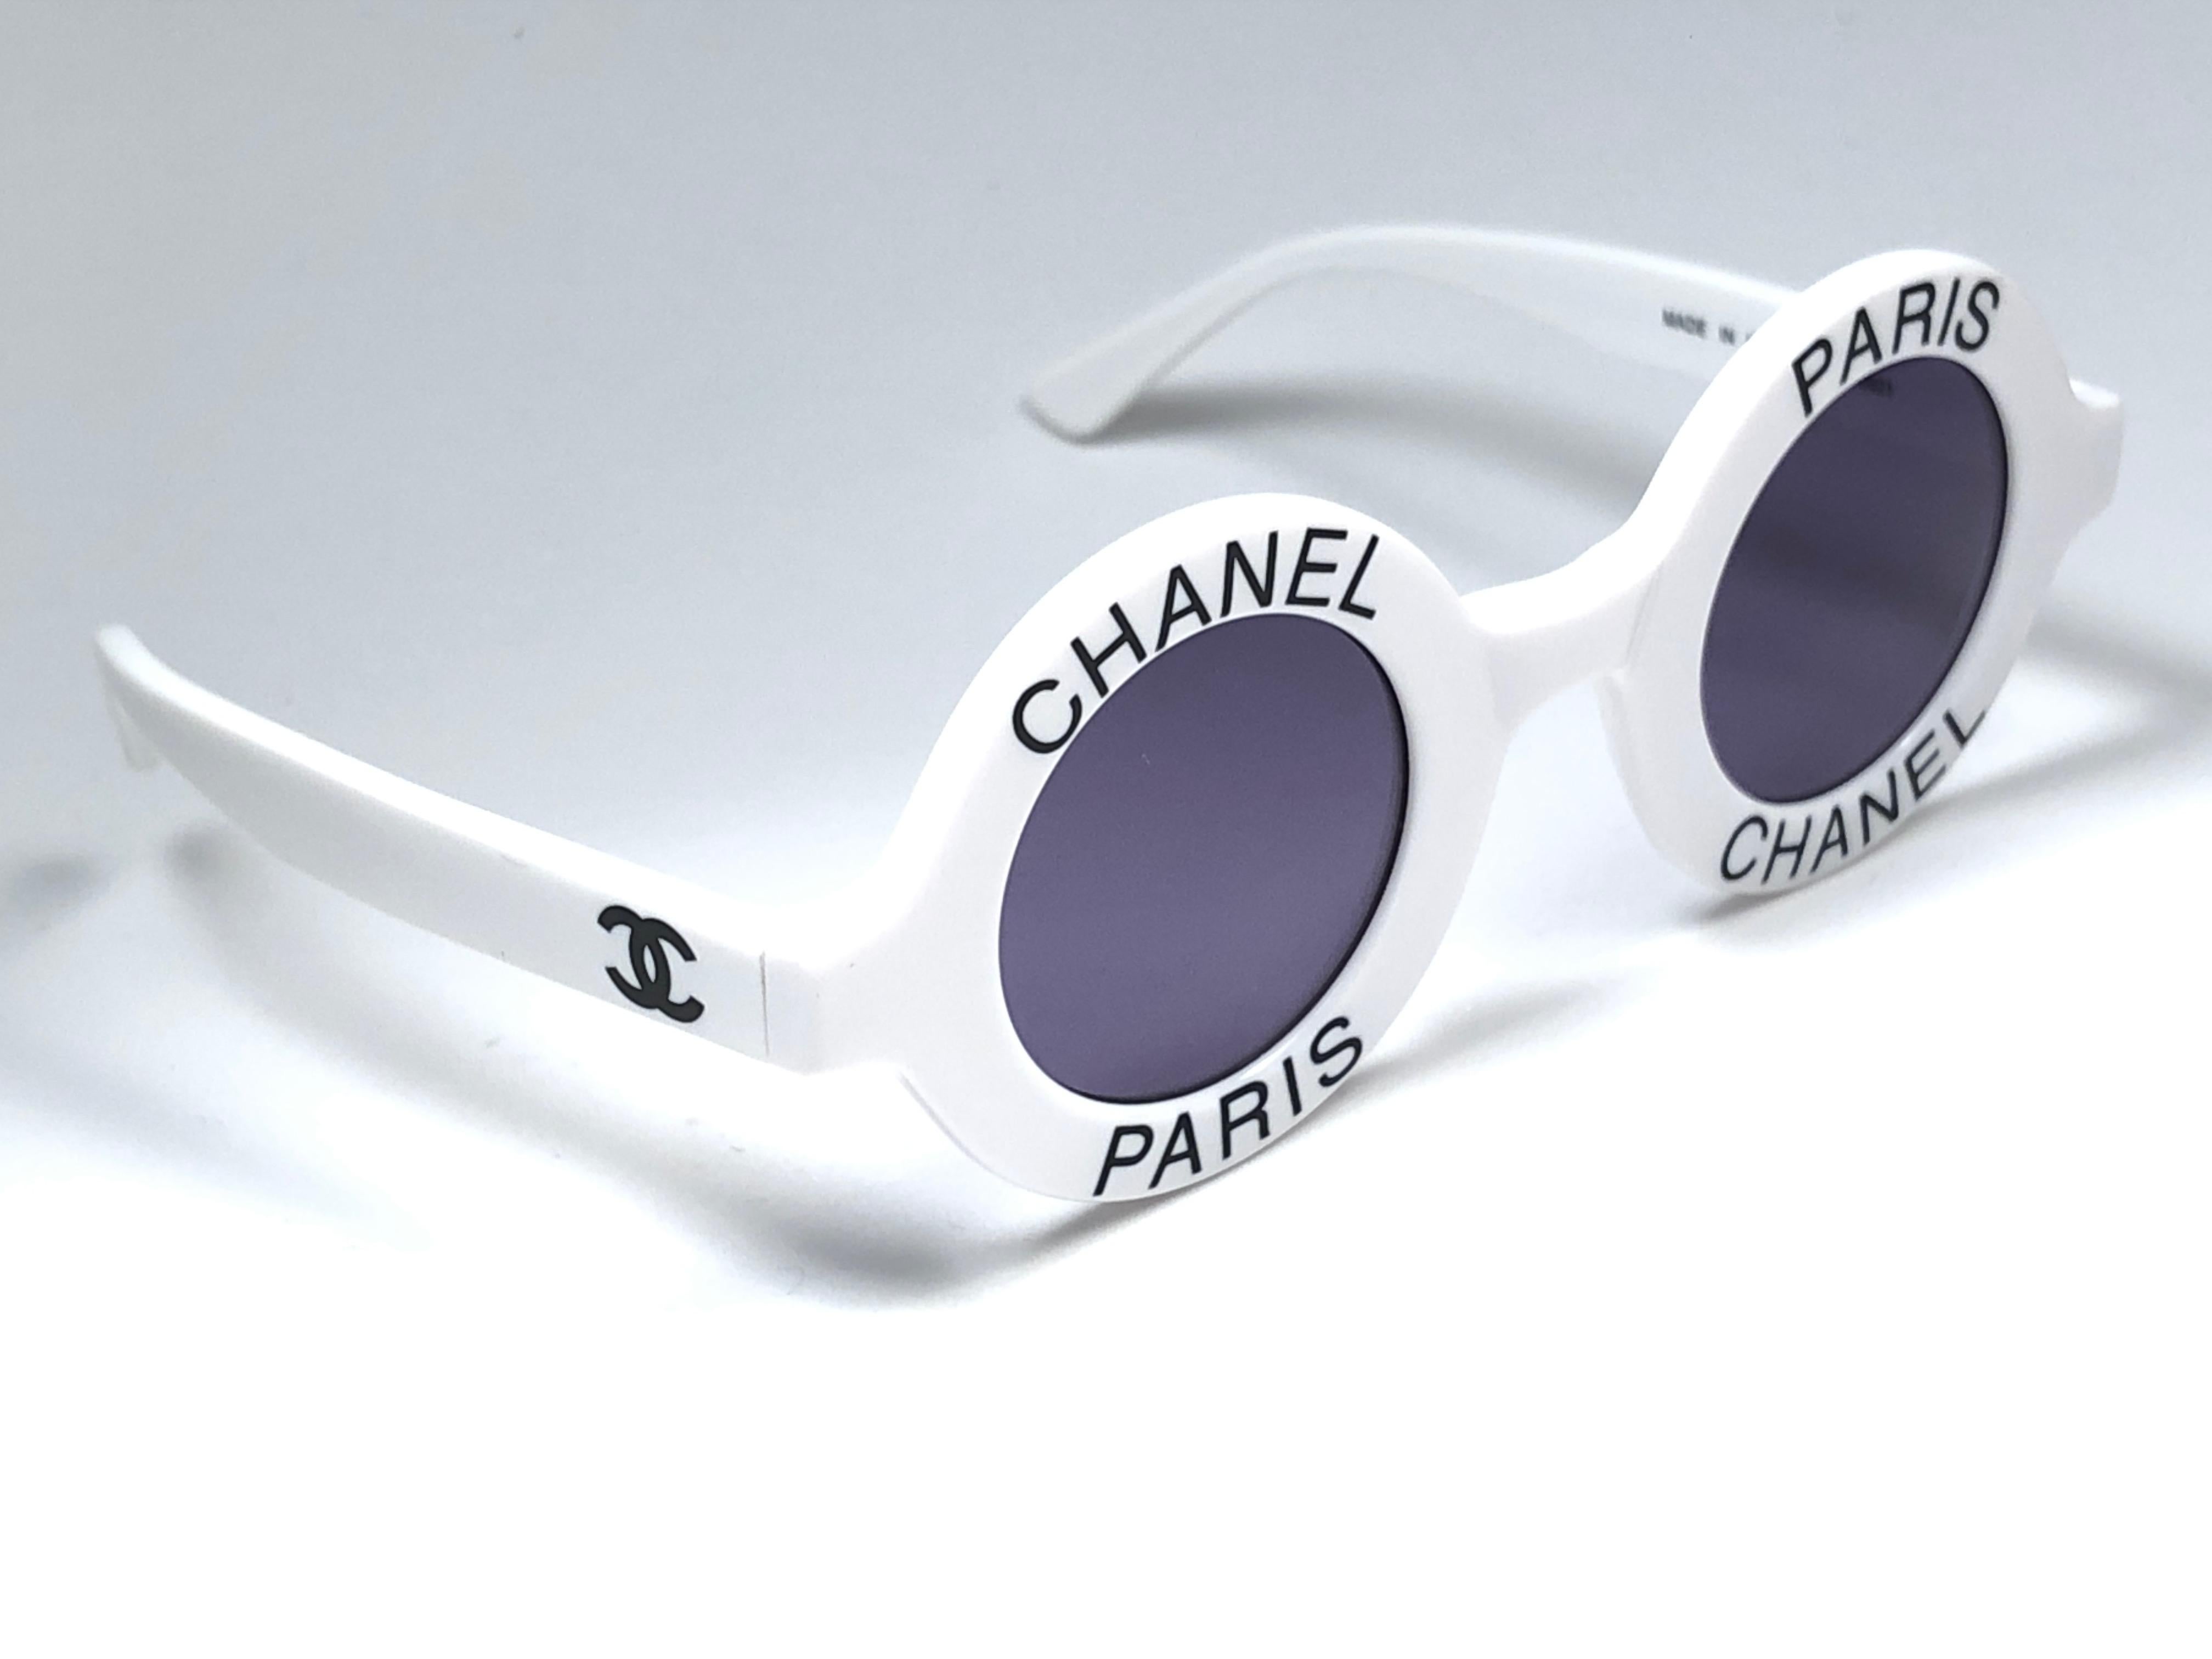 New Rare and Iconic Vintage Chanel 